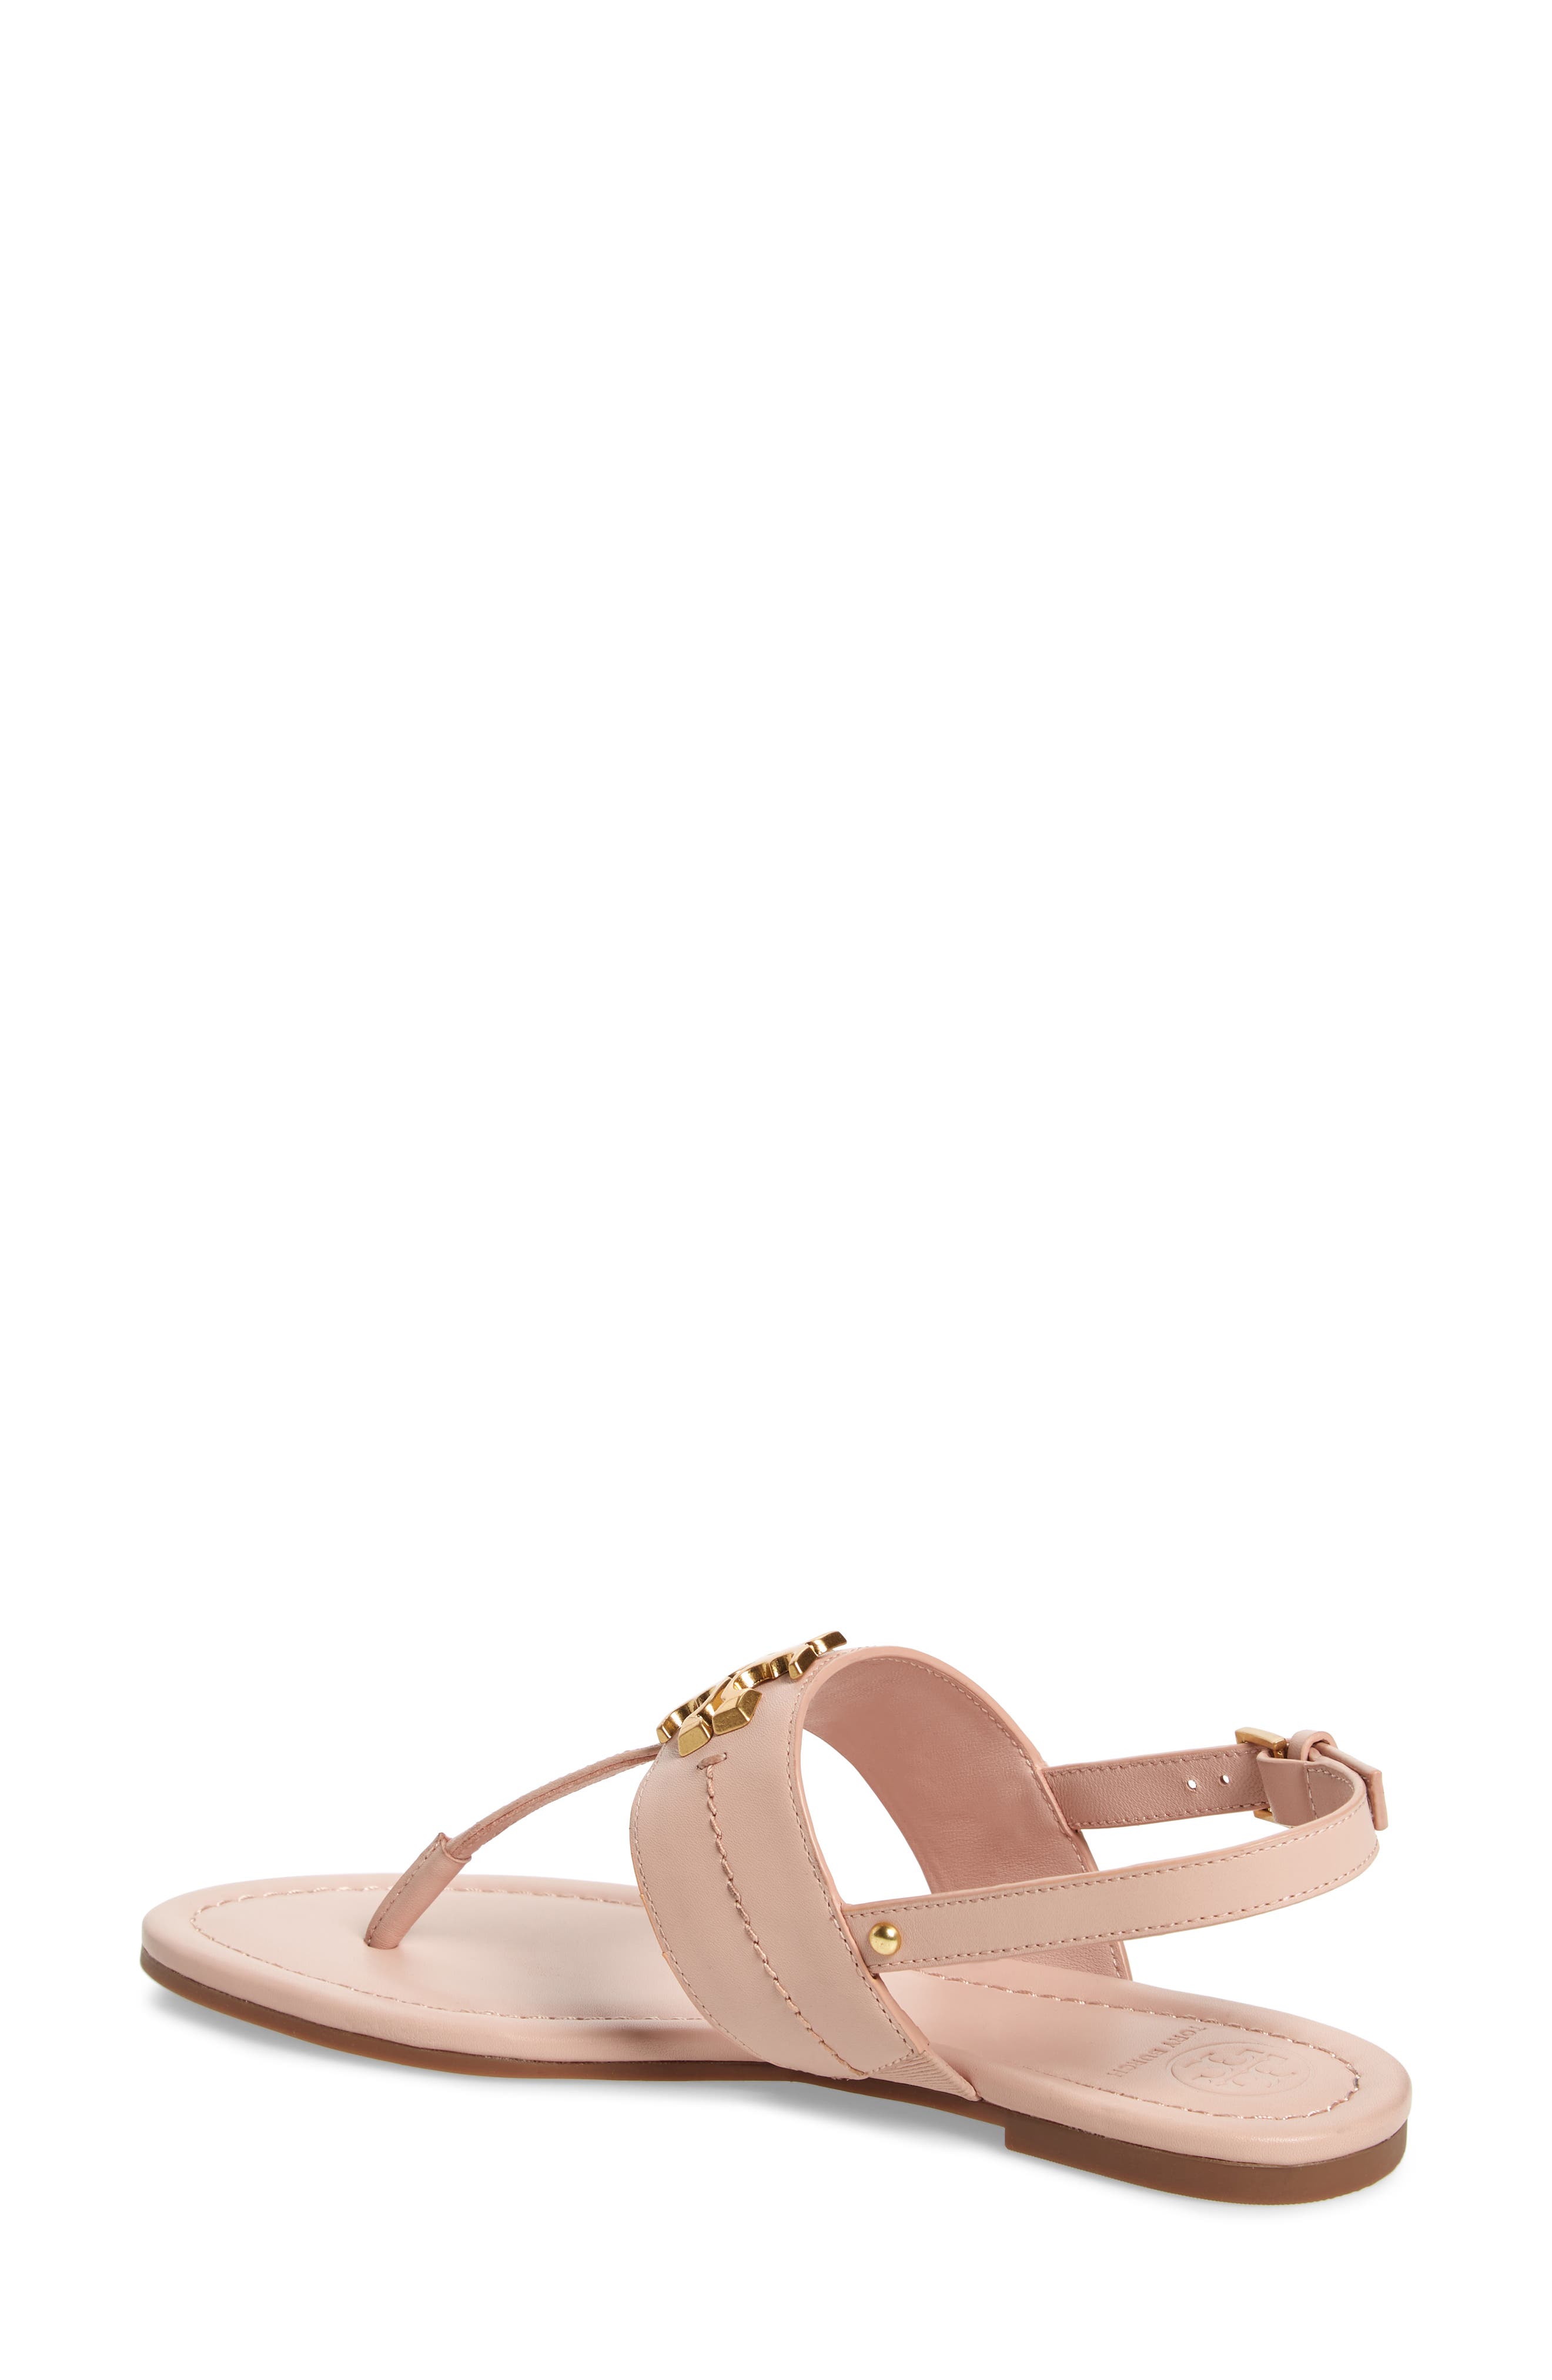 tory burch everly t strap